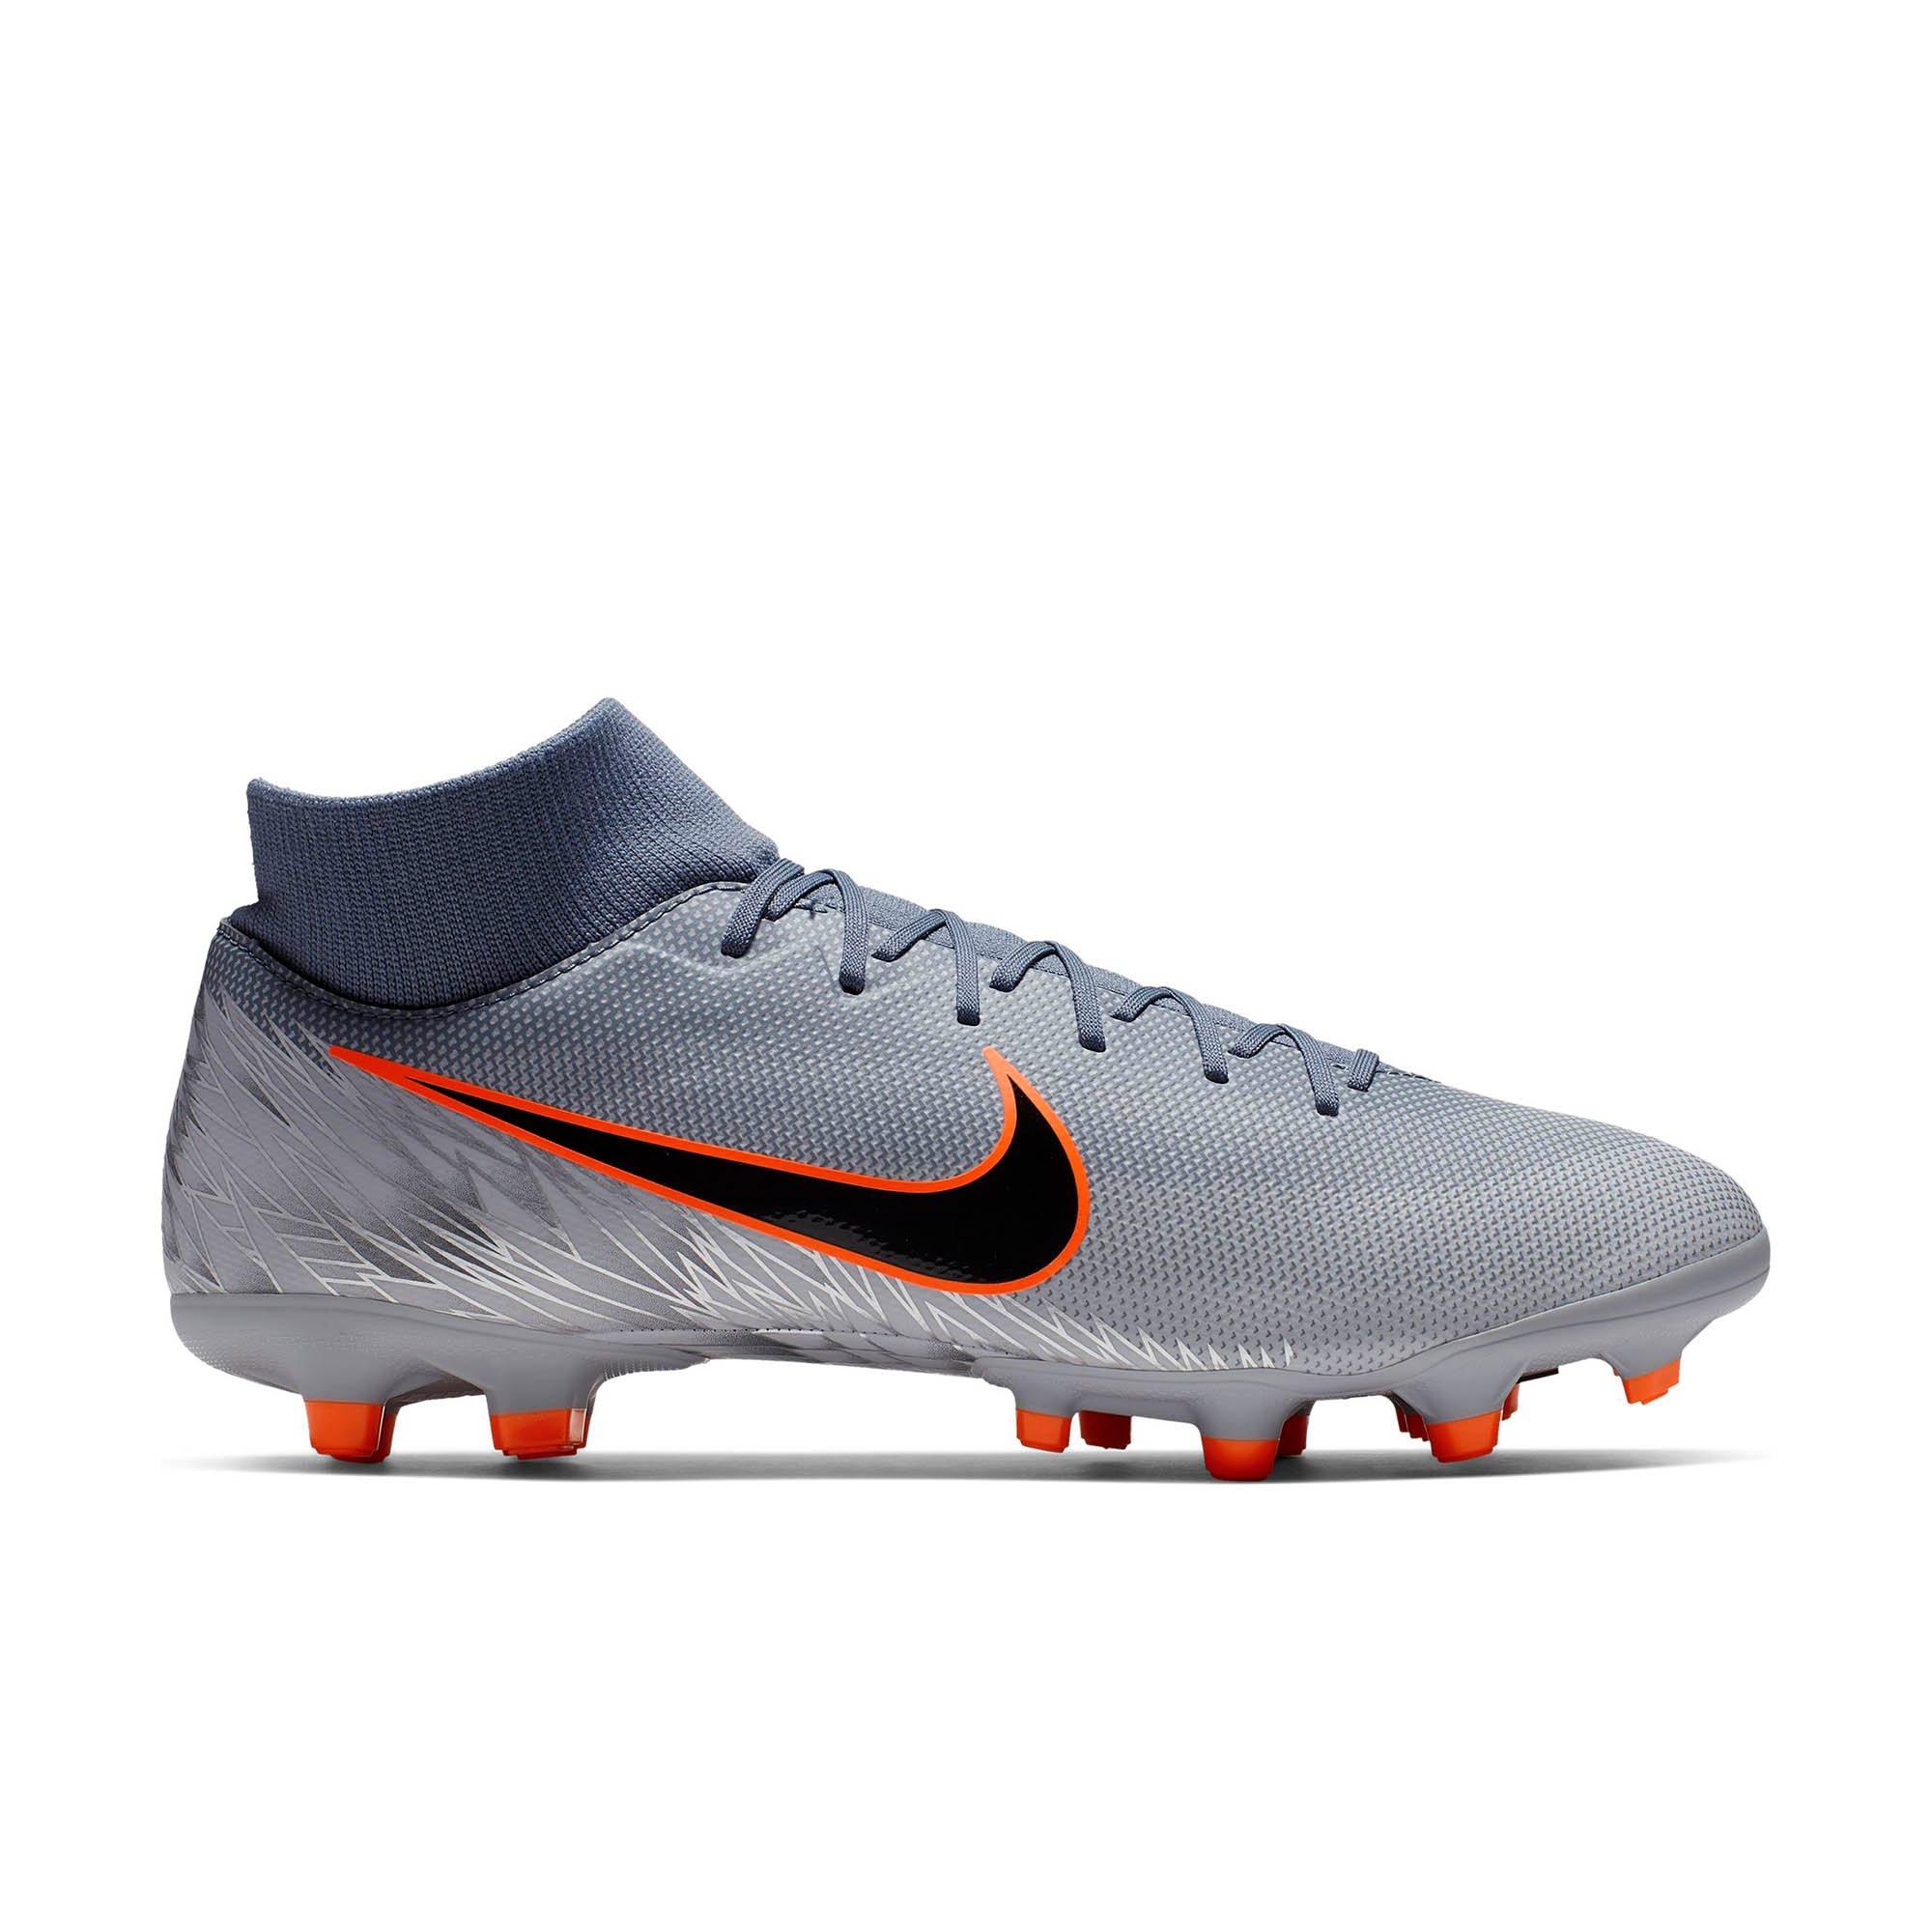 Football Boots Nike Mercurial Superfly VI LVL UP Pro AG Pro.